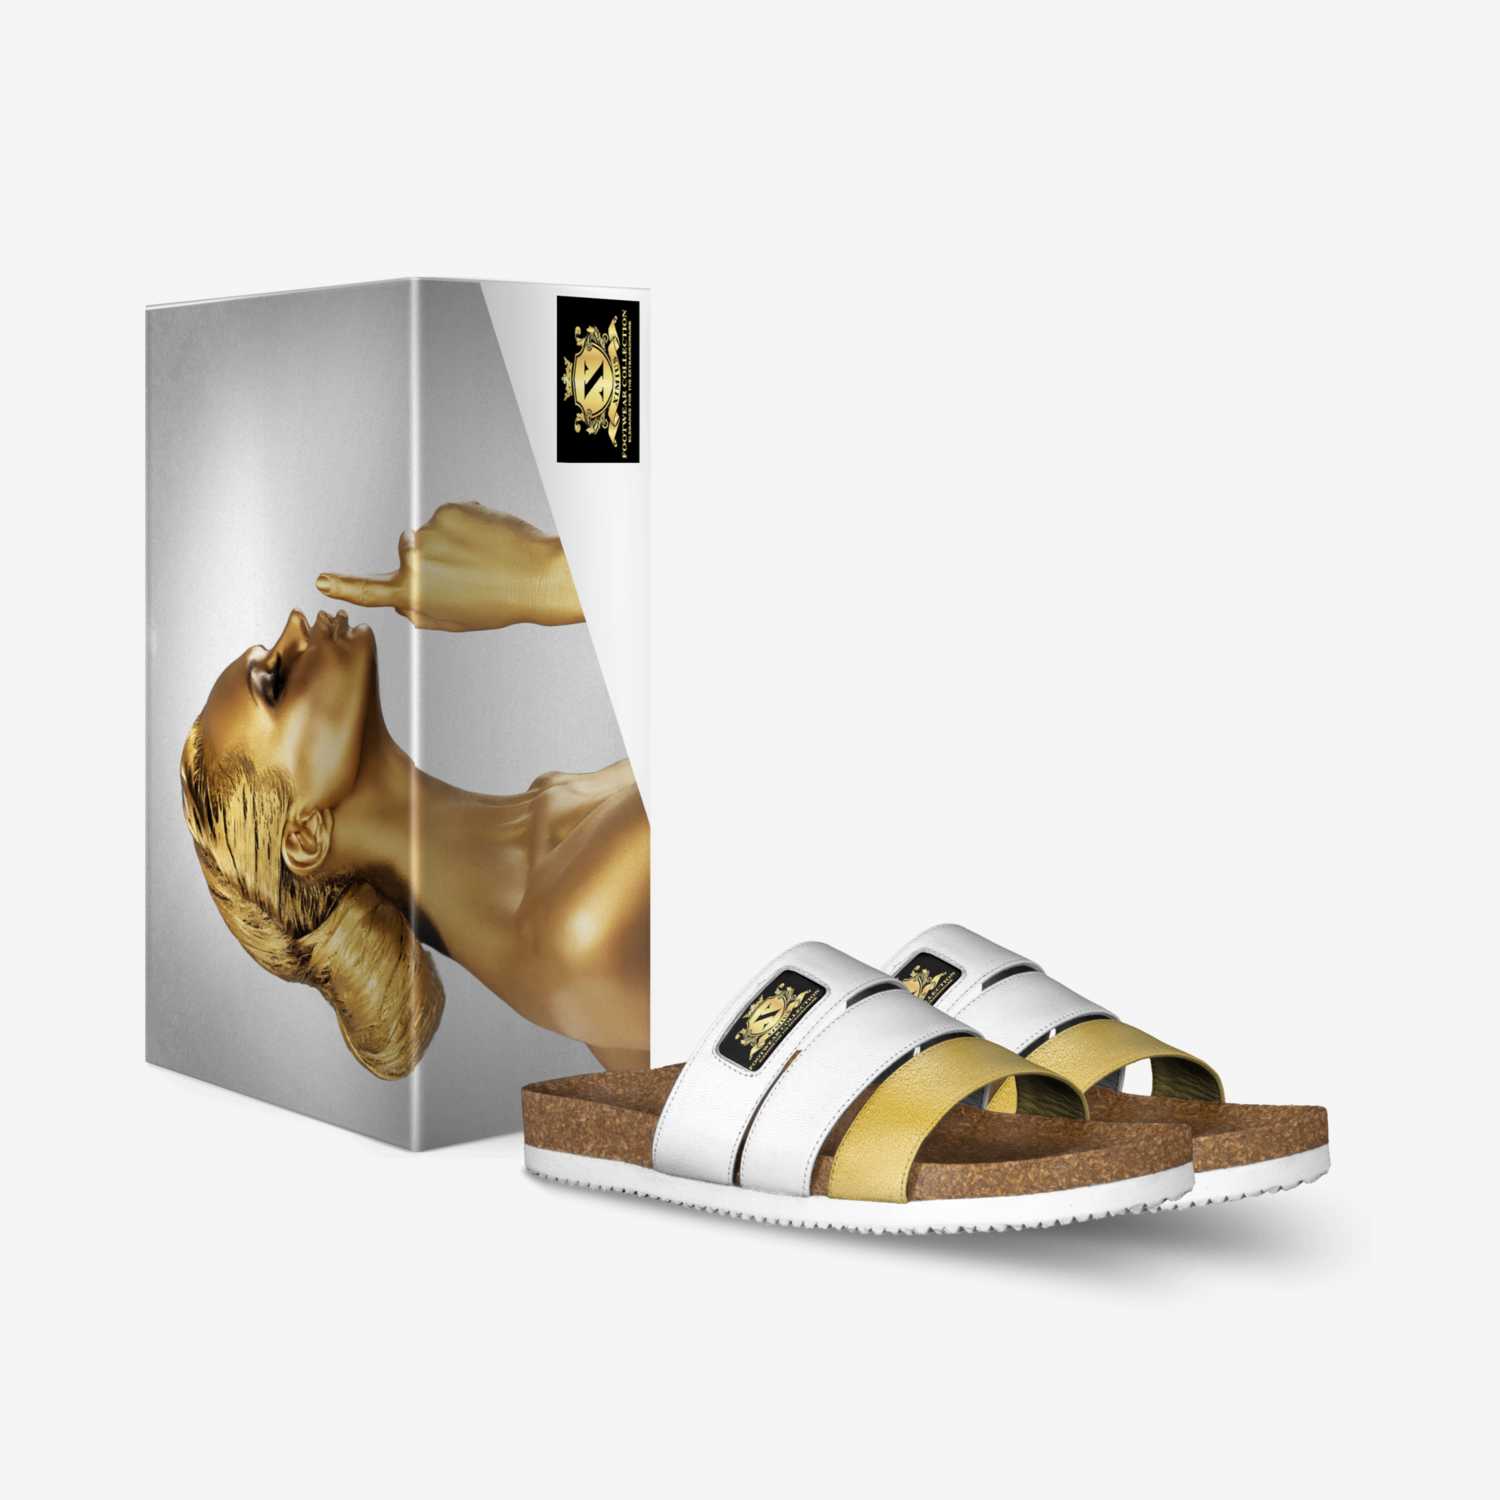 Goldii/ Wht custom made in Italy shoes by Christia Diaz | Box view